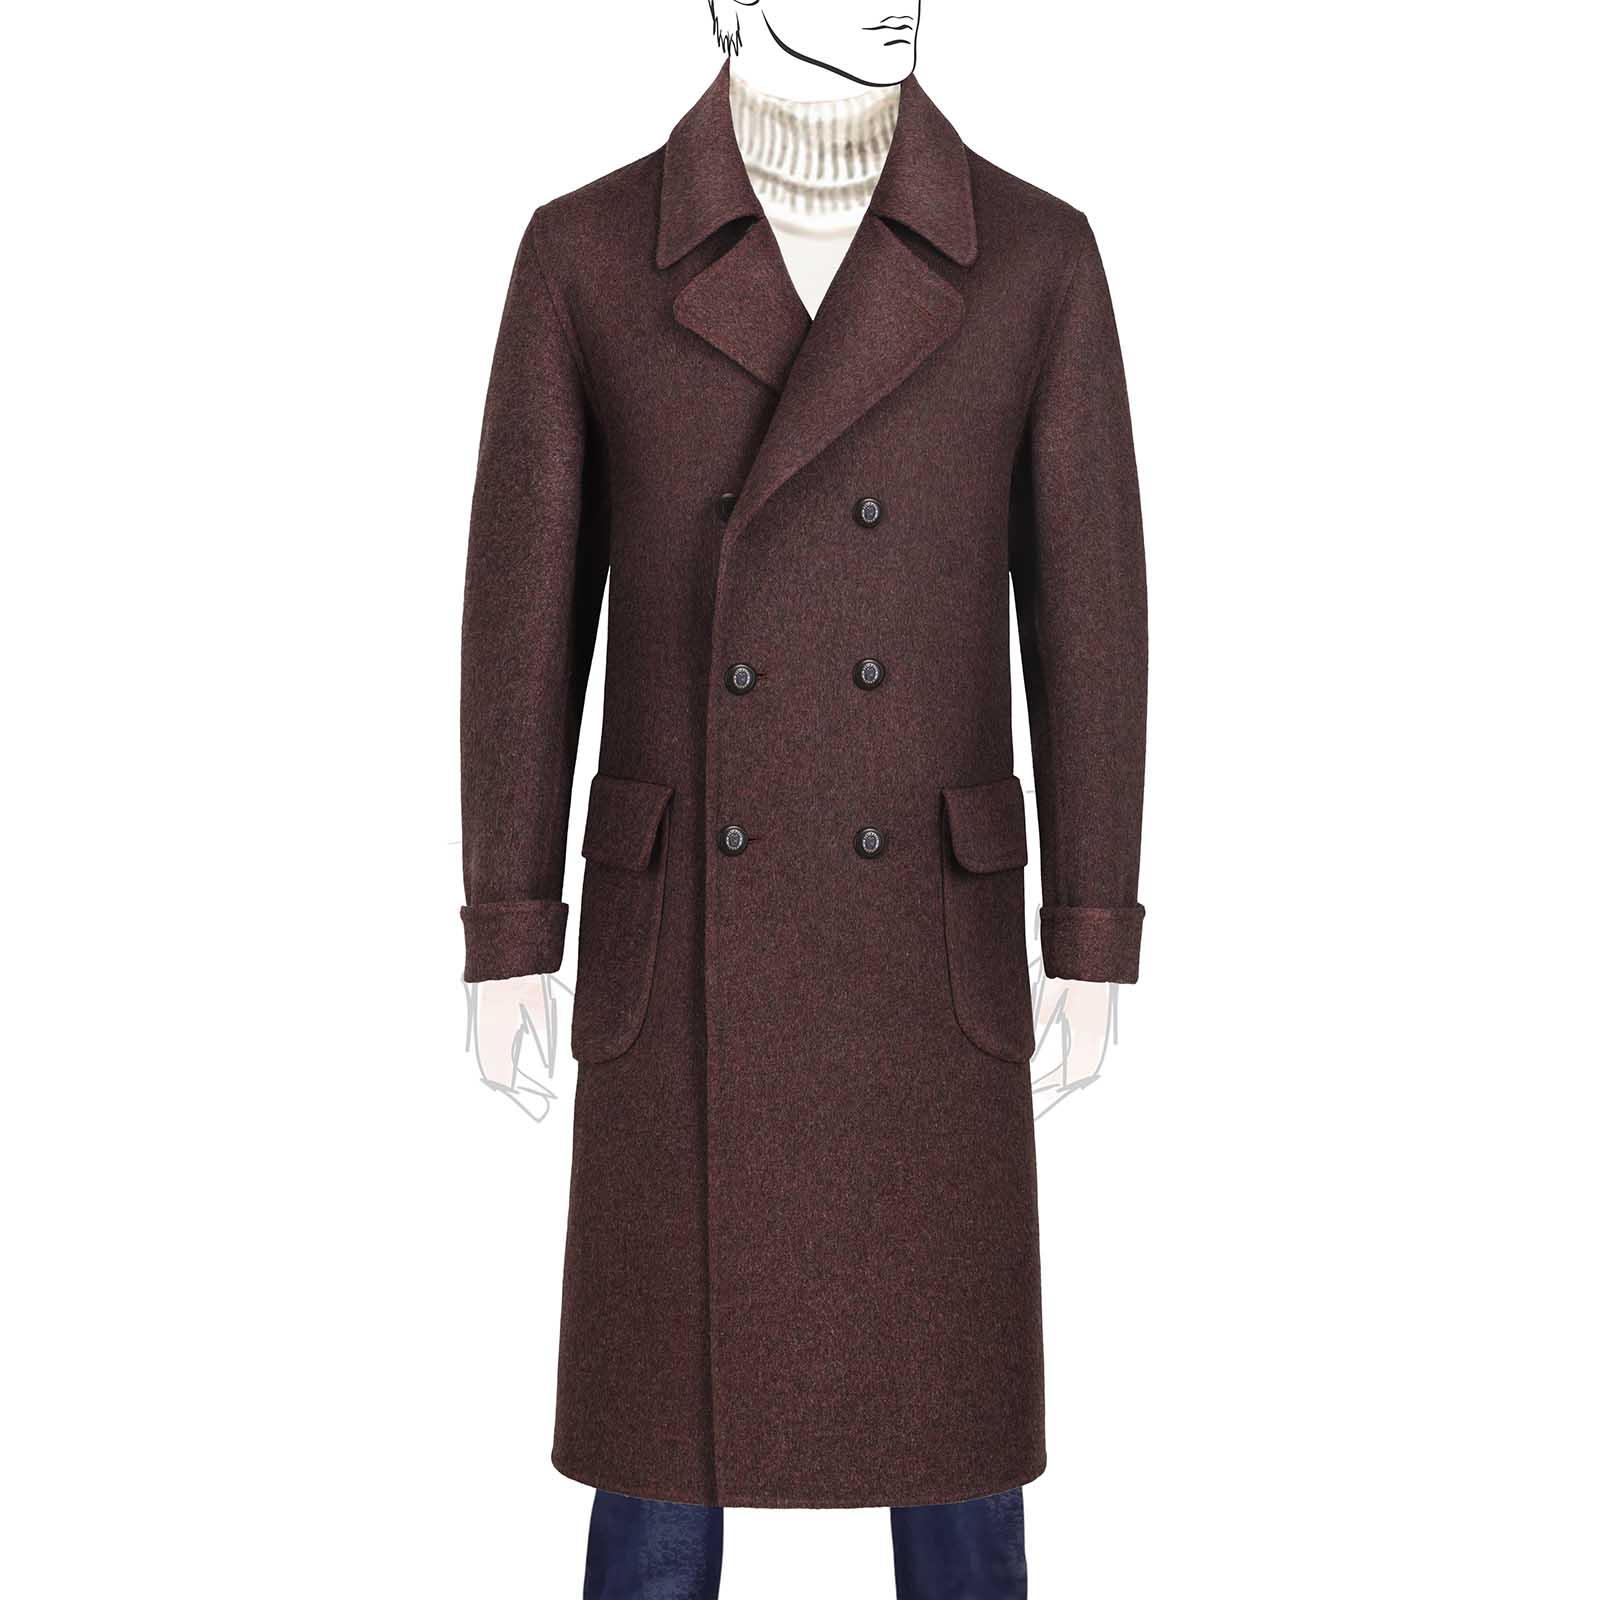 Mariano Rubinacci - Double-breasted coat in burgundy cashmere Limited Edition